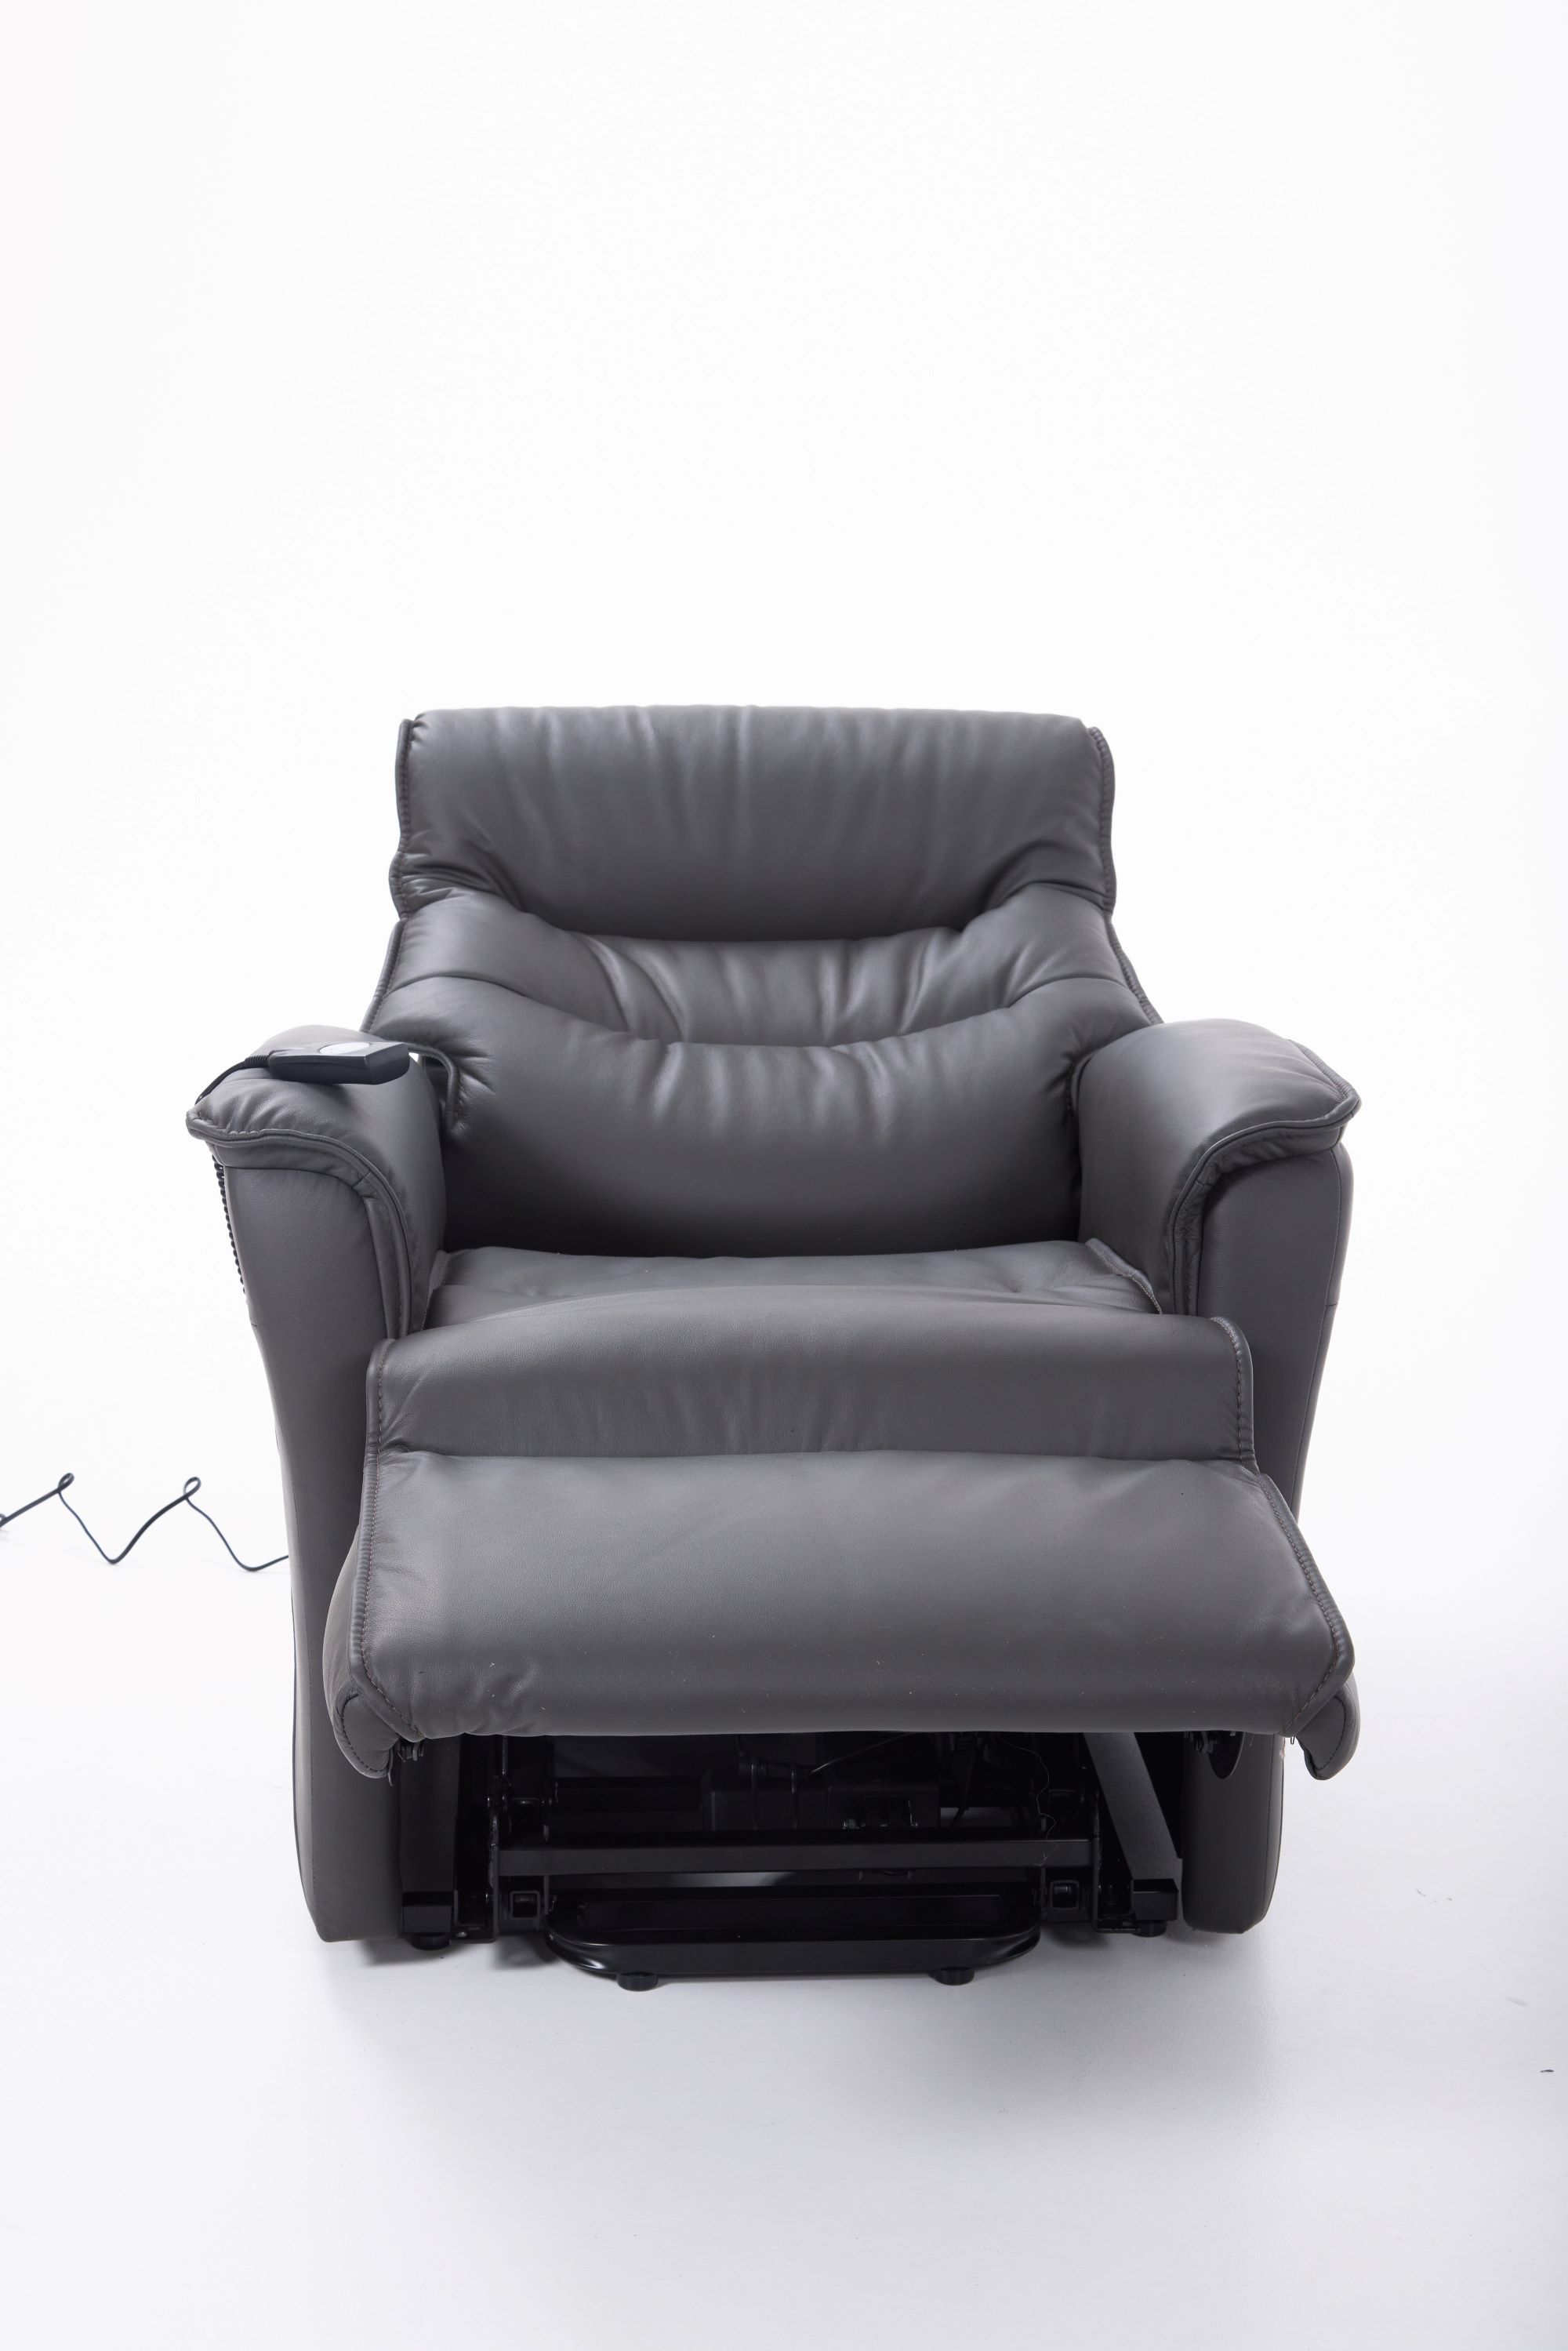 Nordic Spirit Paramount Rise and Recline Chair Graphite